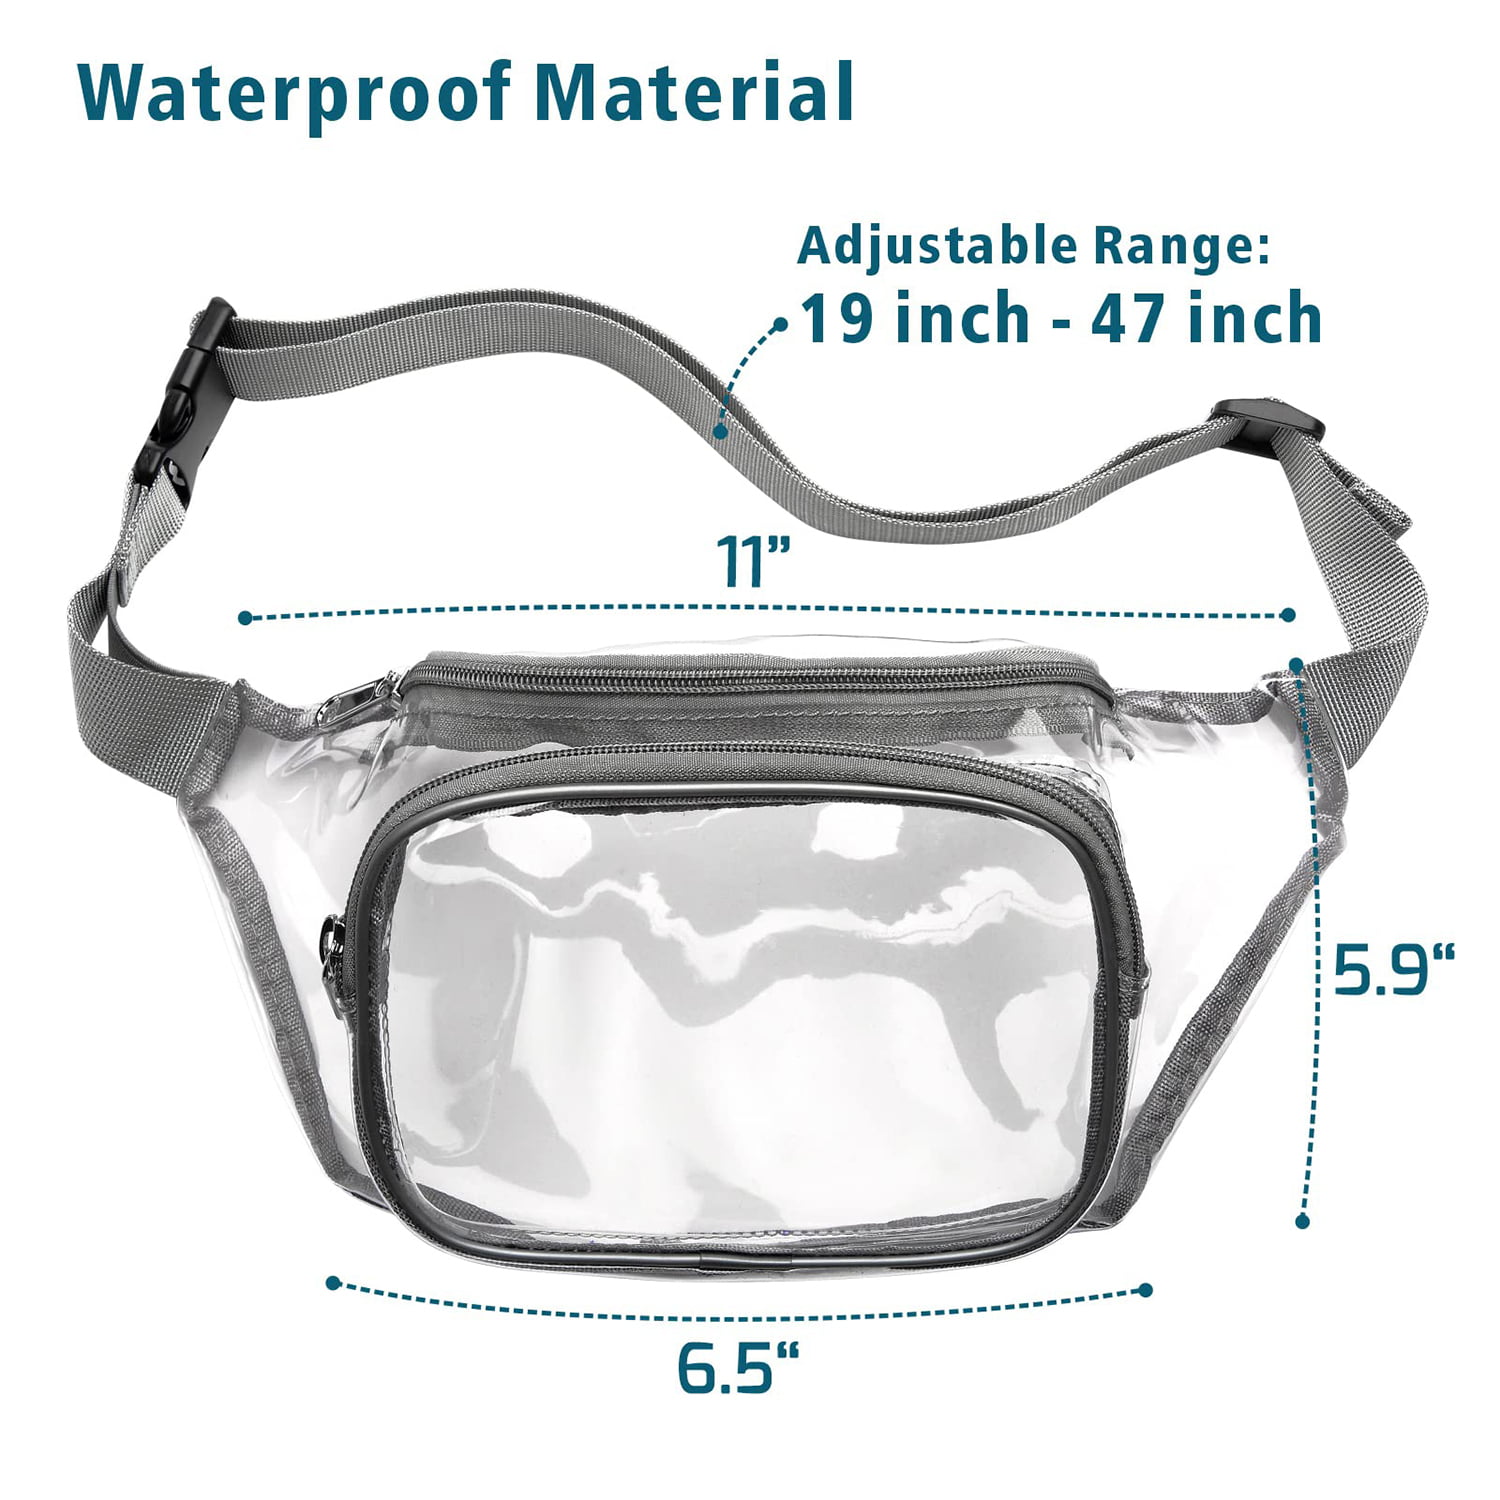  Clear Fanny Pack Stadium Approved - Packism Waterproof Cute Waist  Bag for Women Men Clear Purse Transparent Adjustable Belt Bag for Concerts,  Festival, Travel, Events, White